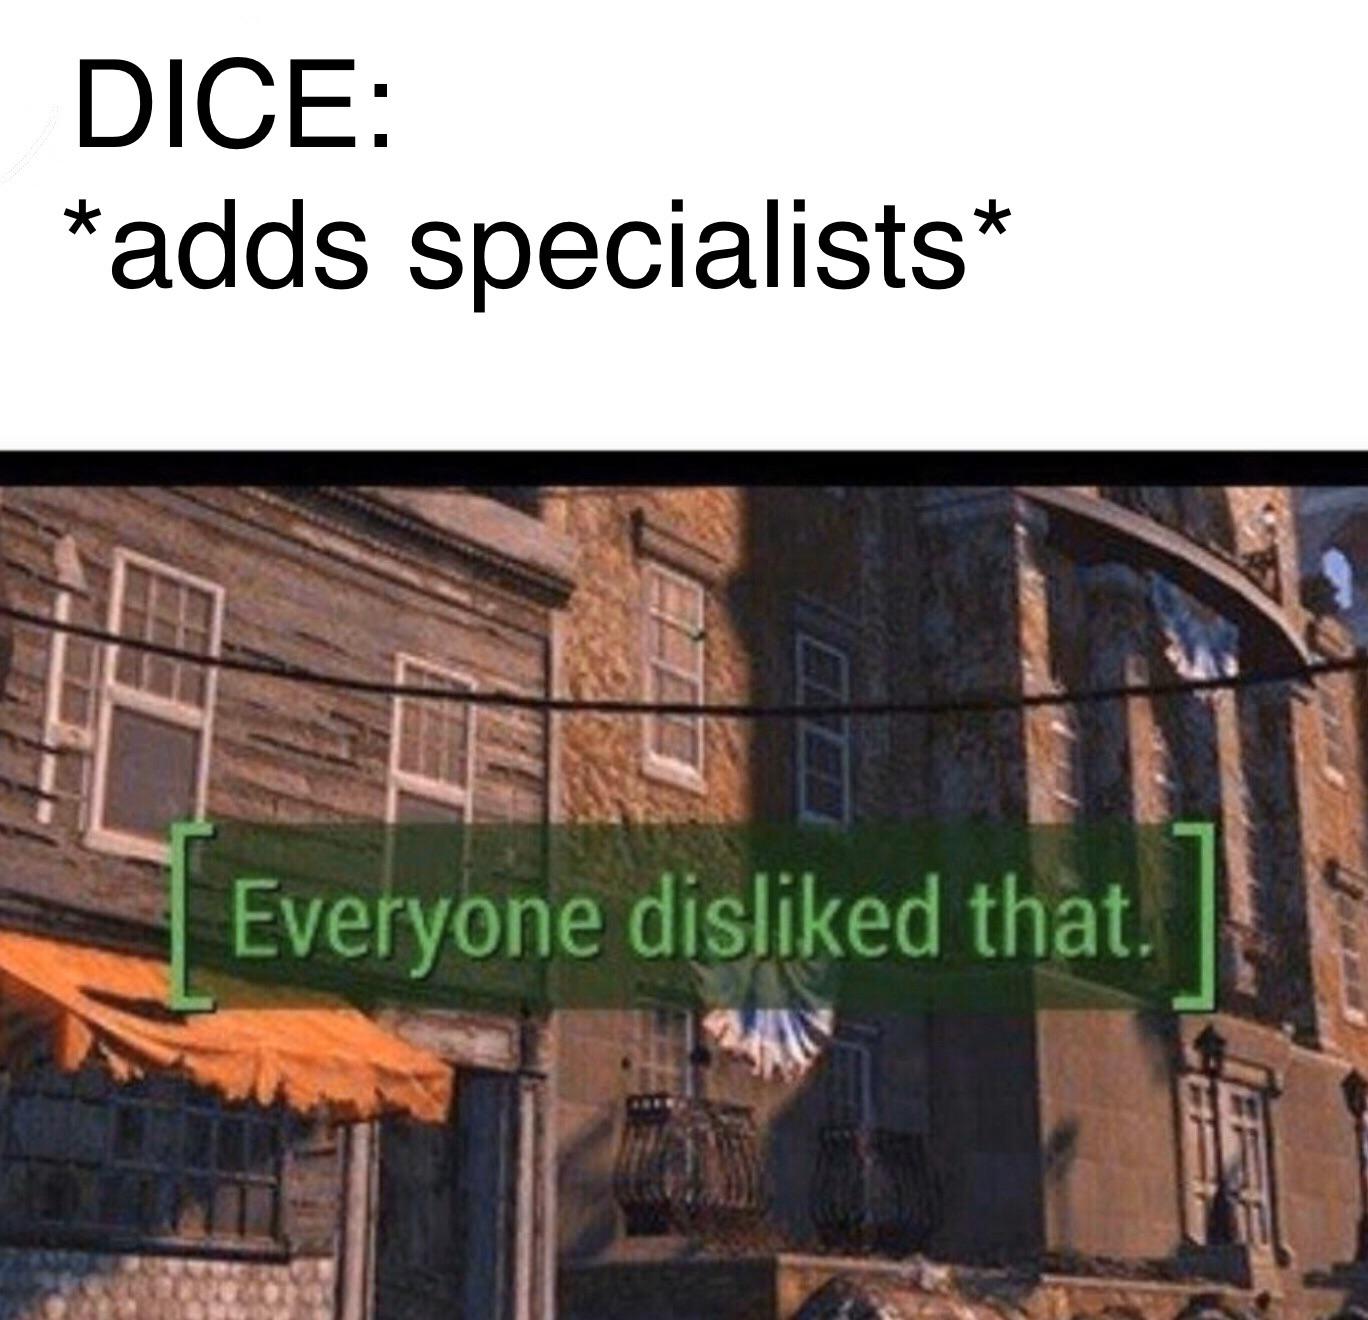 select security - Dice adds specialists Everyone disd that.